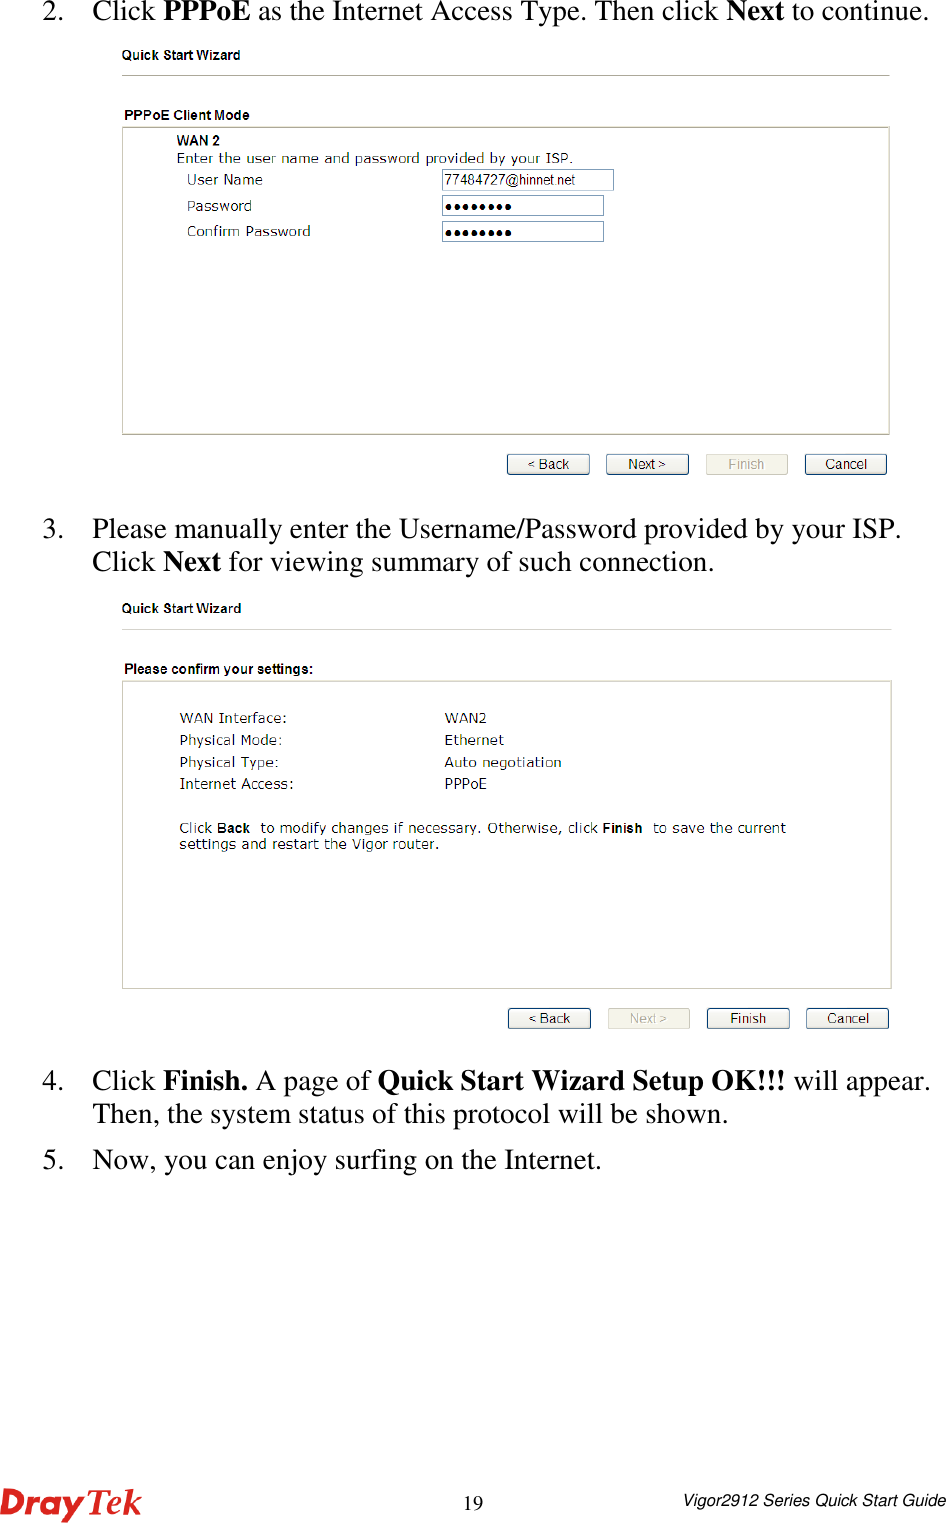  Vigor2912 Series Quick Start Guide 192. Click PPPoE as the Internet Access Type. Then click Next to continue.  3. Please manually enter the Username/Password provided by your ISP. Click Next for viewing summary of such connection.  4. Click Finish. A page of Quick Start Wizard Setup OK!!! will appear. Then, the system status of this protocol will be shown. 5. Now, you can enjoy surfing on the Internet. 